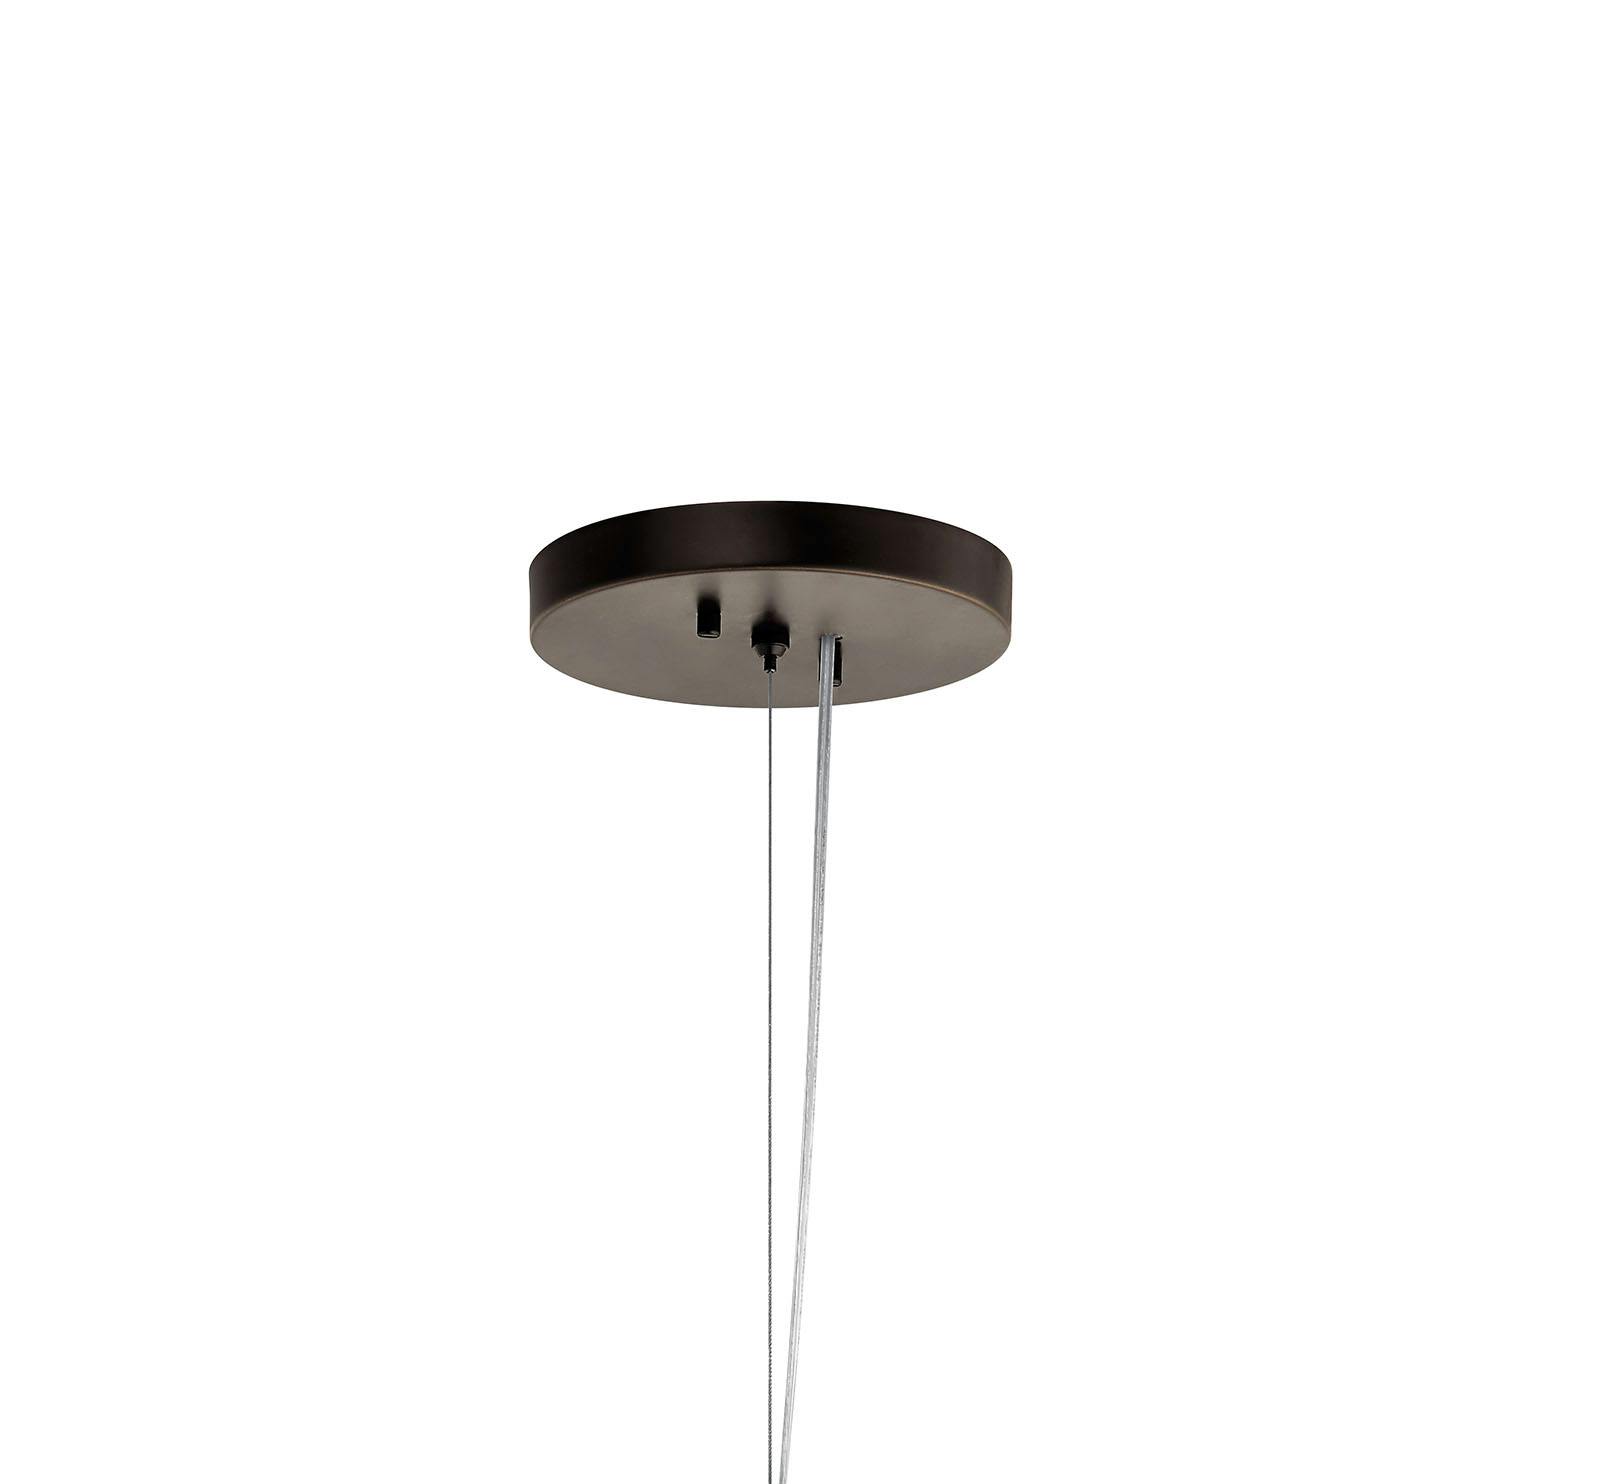 Canopy image of the Moderne Pendant 42995OZLED on a white background